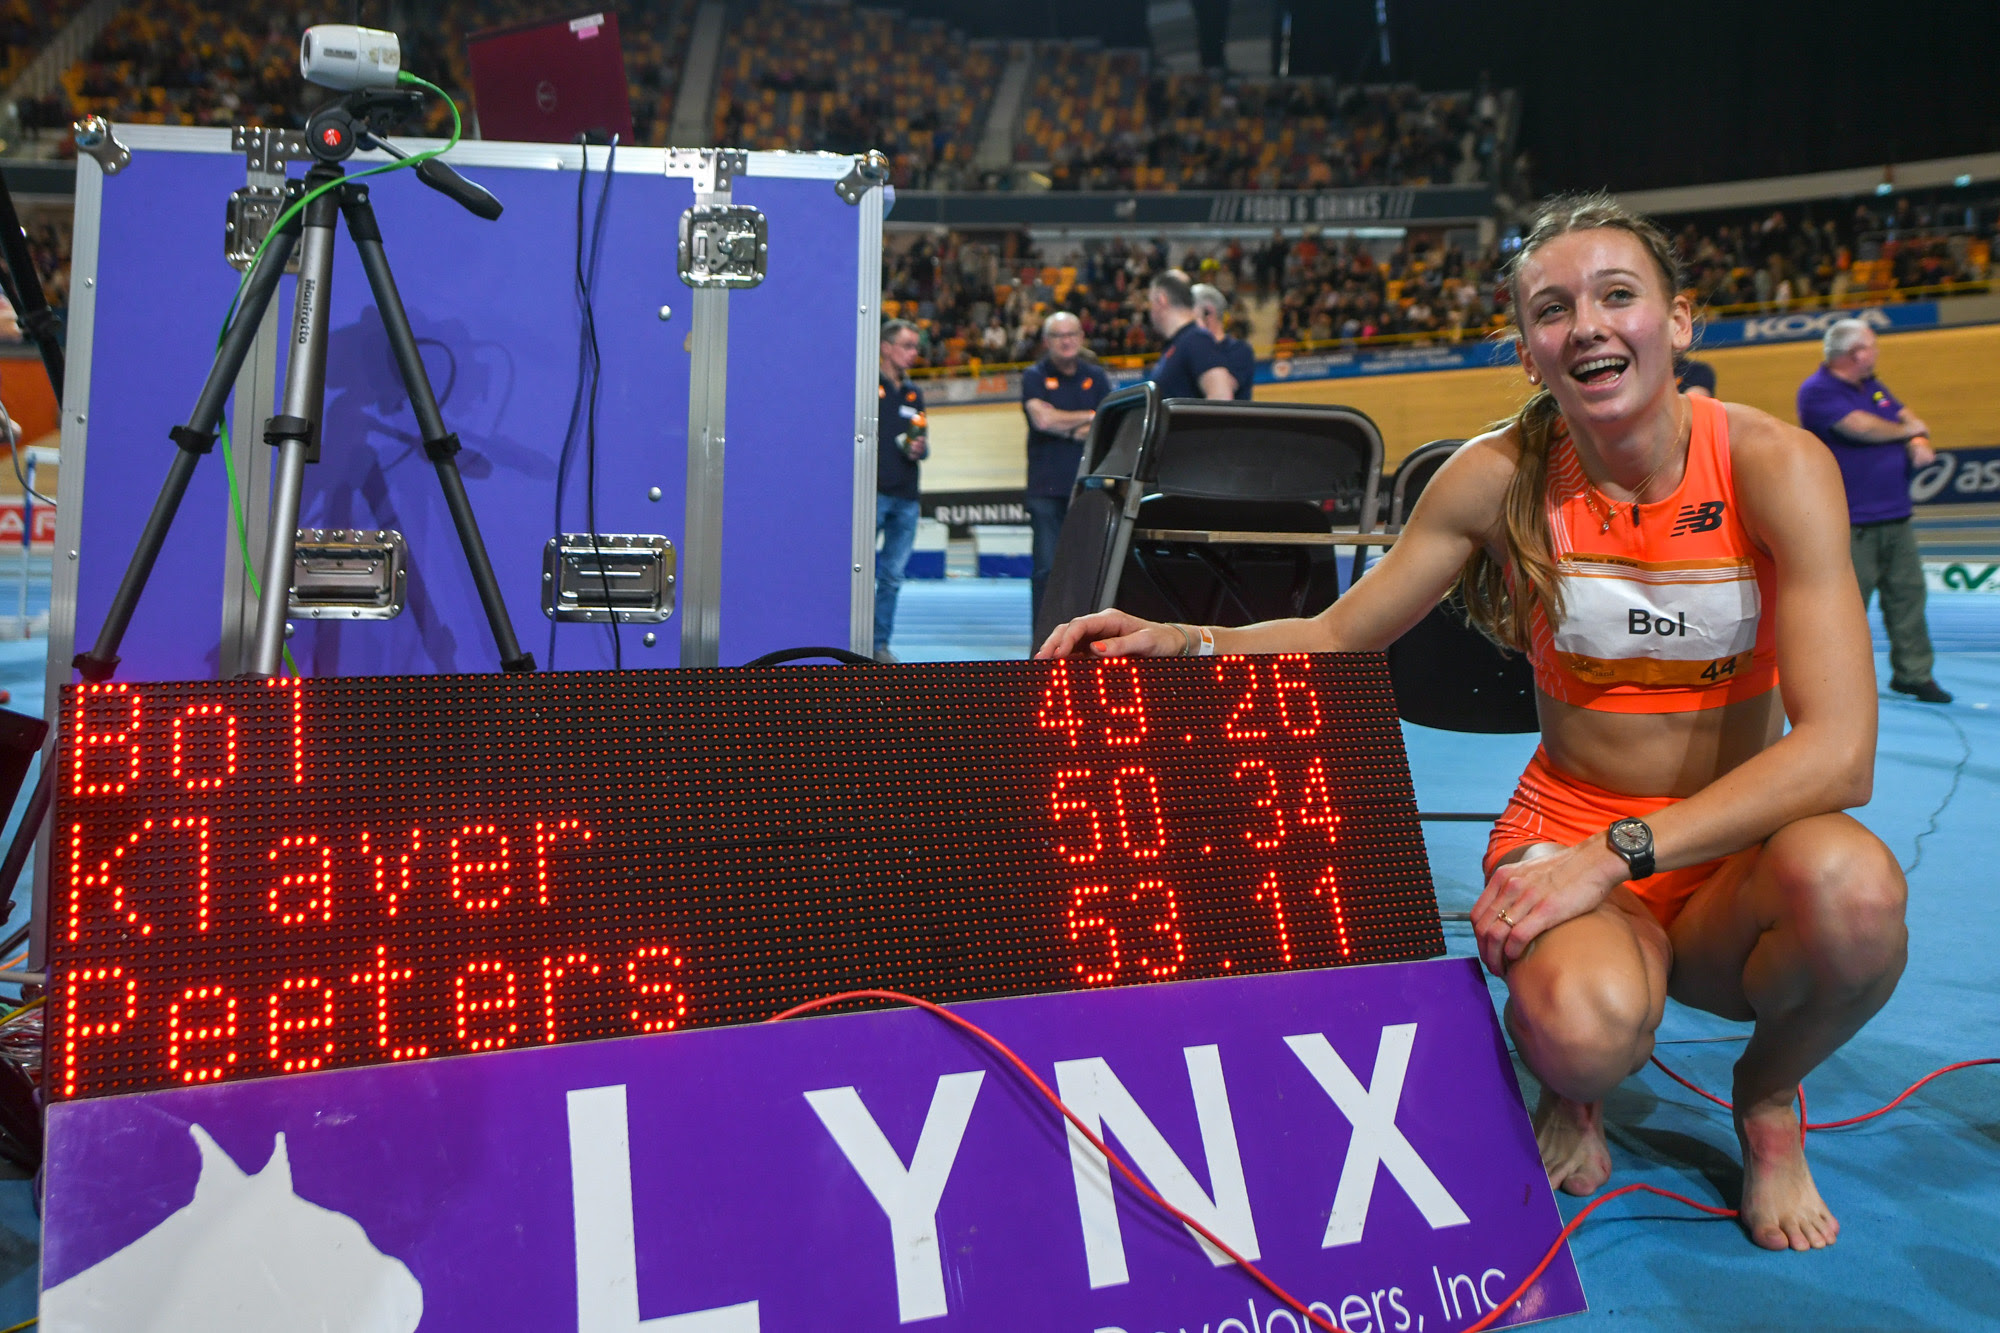 Dutch athlete Femke Bol breaks one of the longest-standing records with world indoor 400m triumph